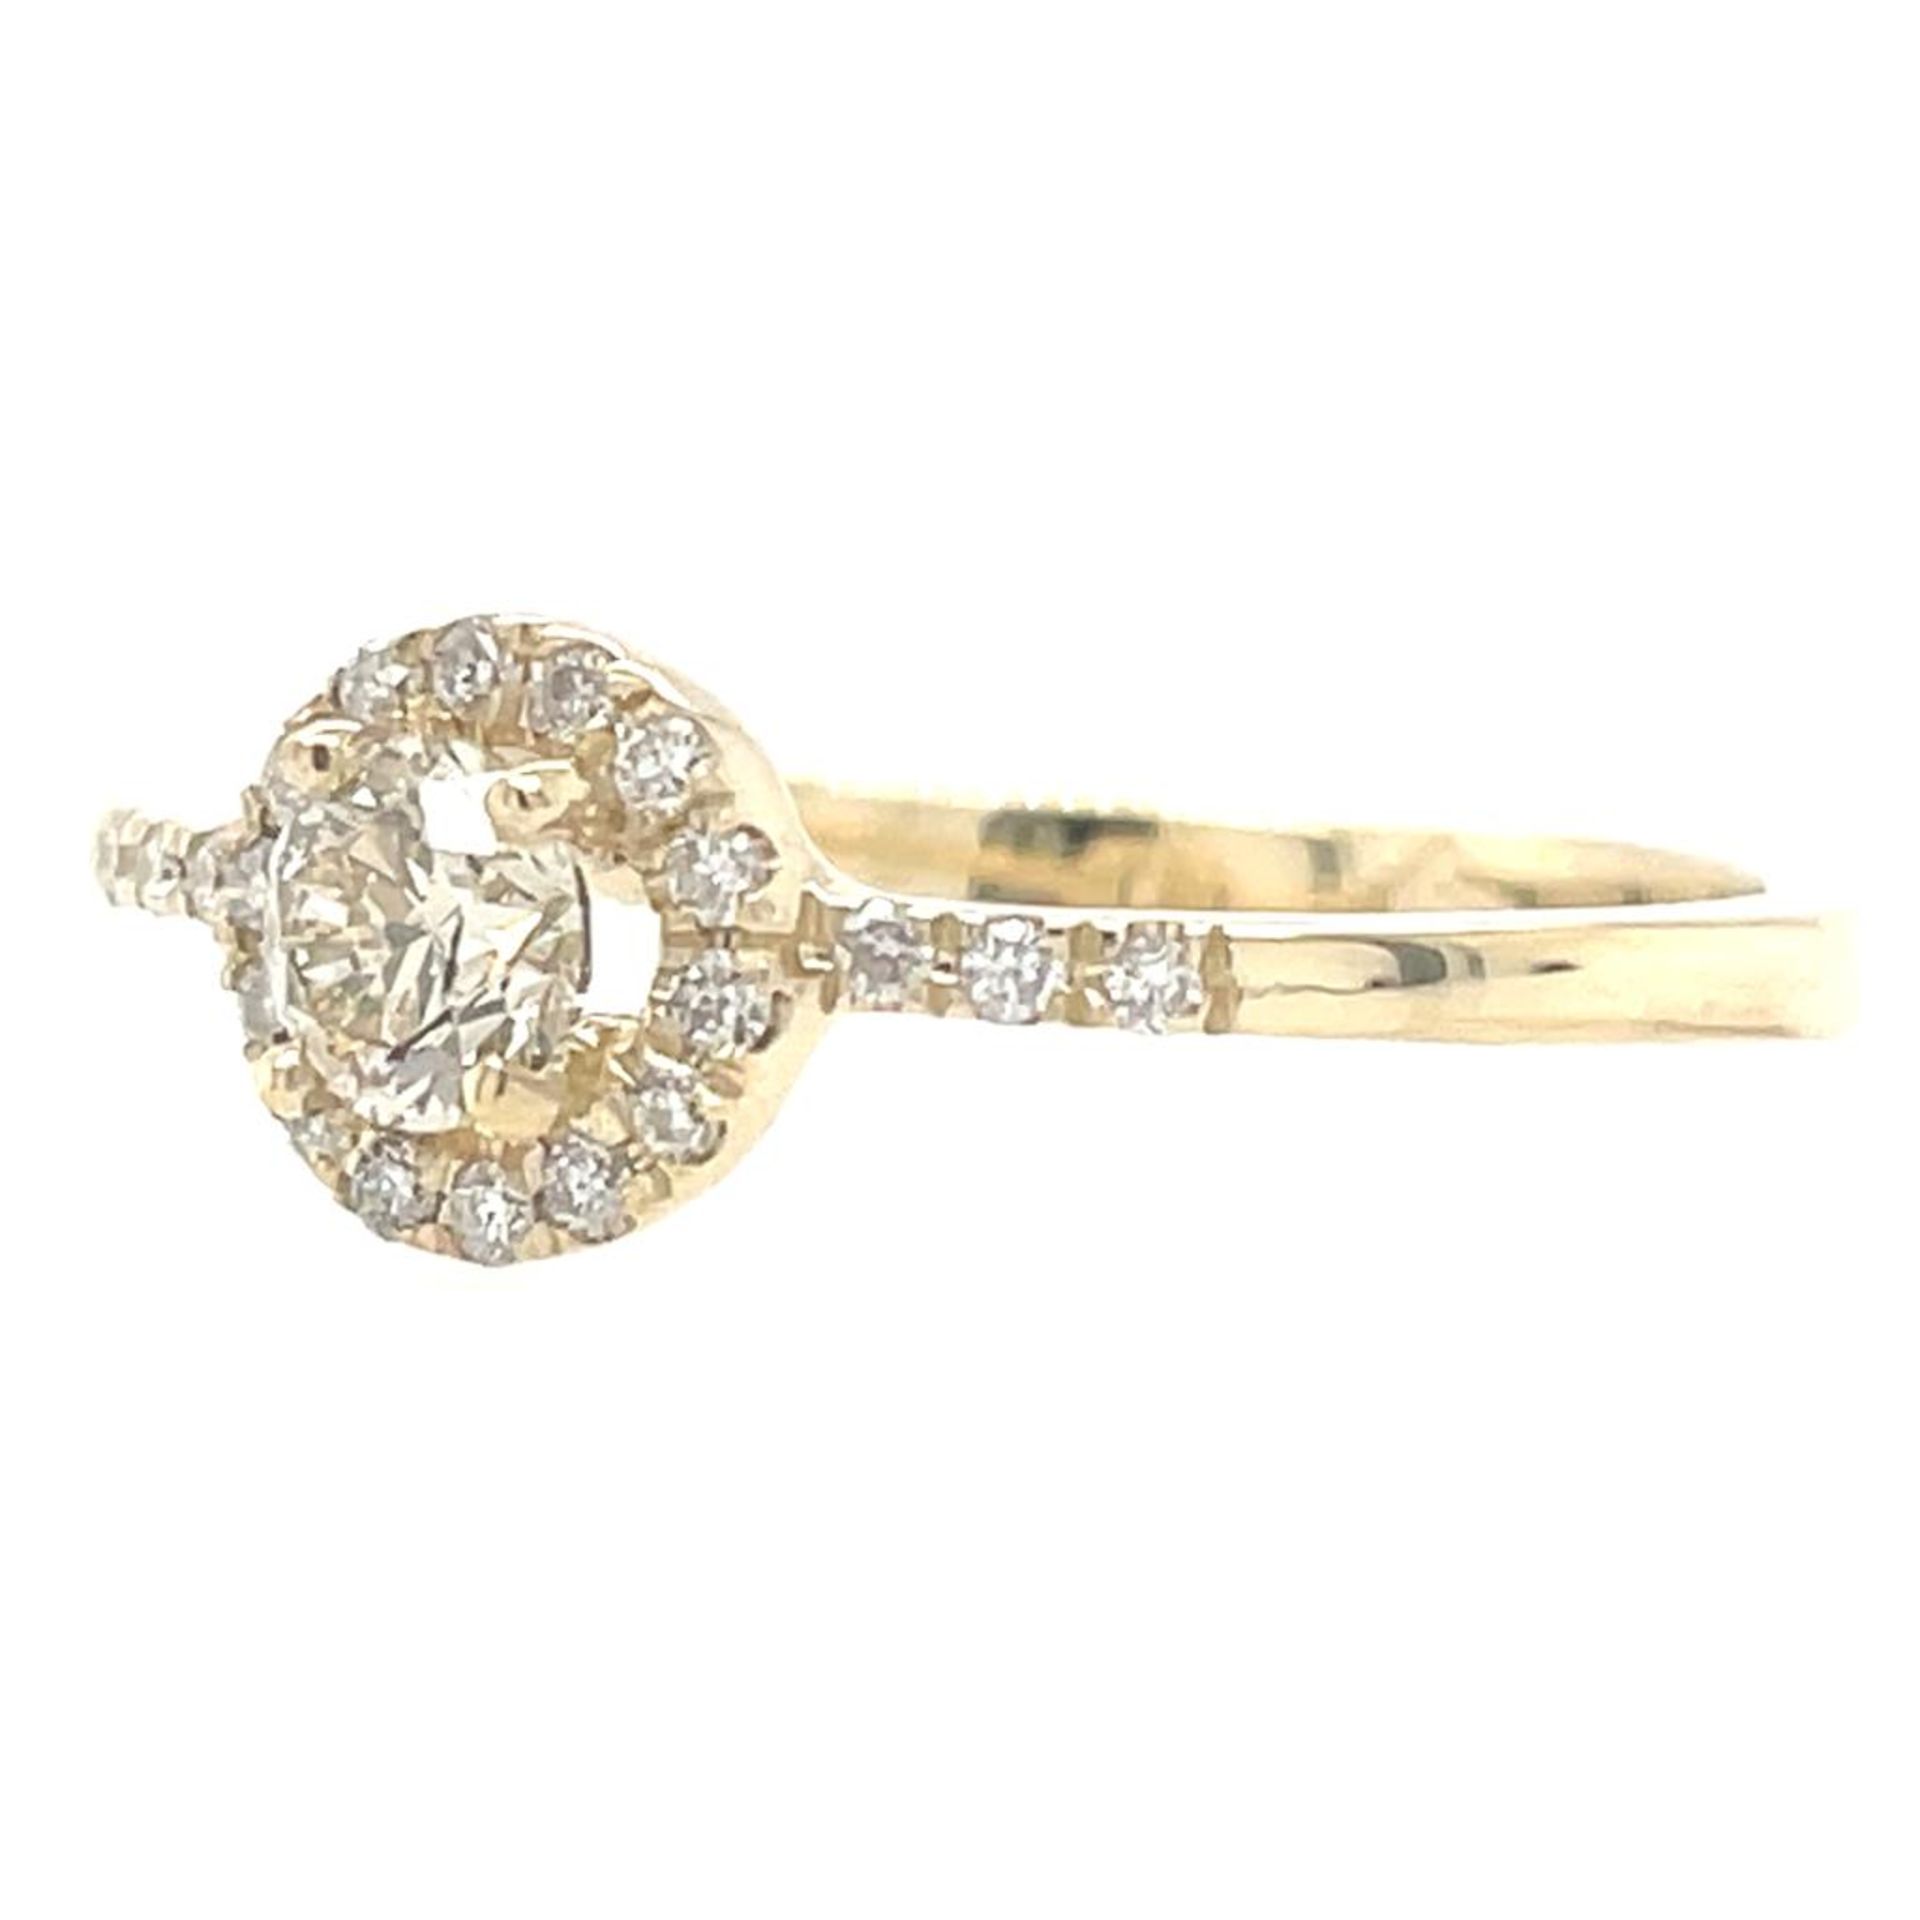 YELLOW GOLD RING 14K 1.89 GR WITH DIAMOND 0.30 + 0.11 CT CERT ABSENT - RNG209 - Bild 2 aus 4